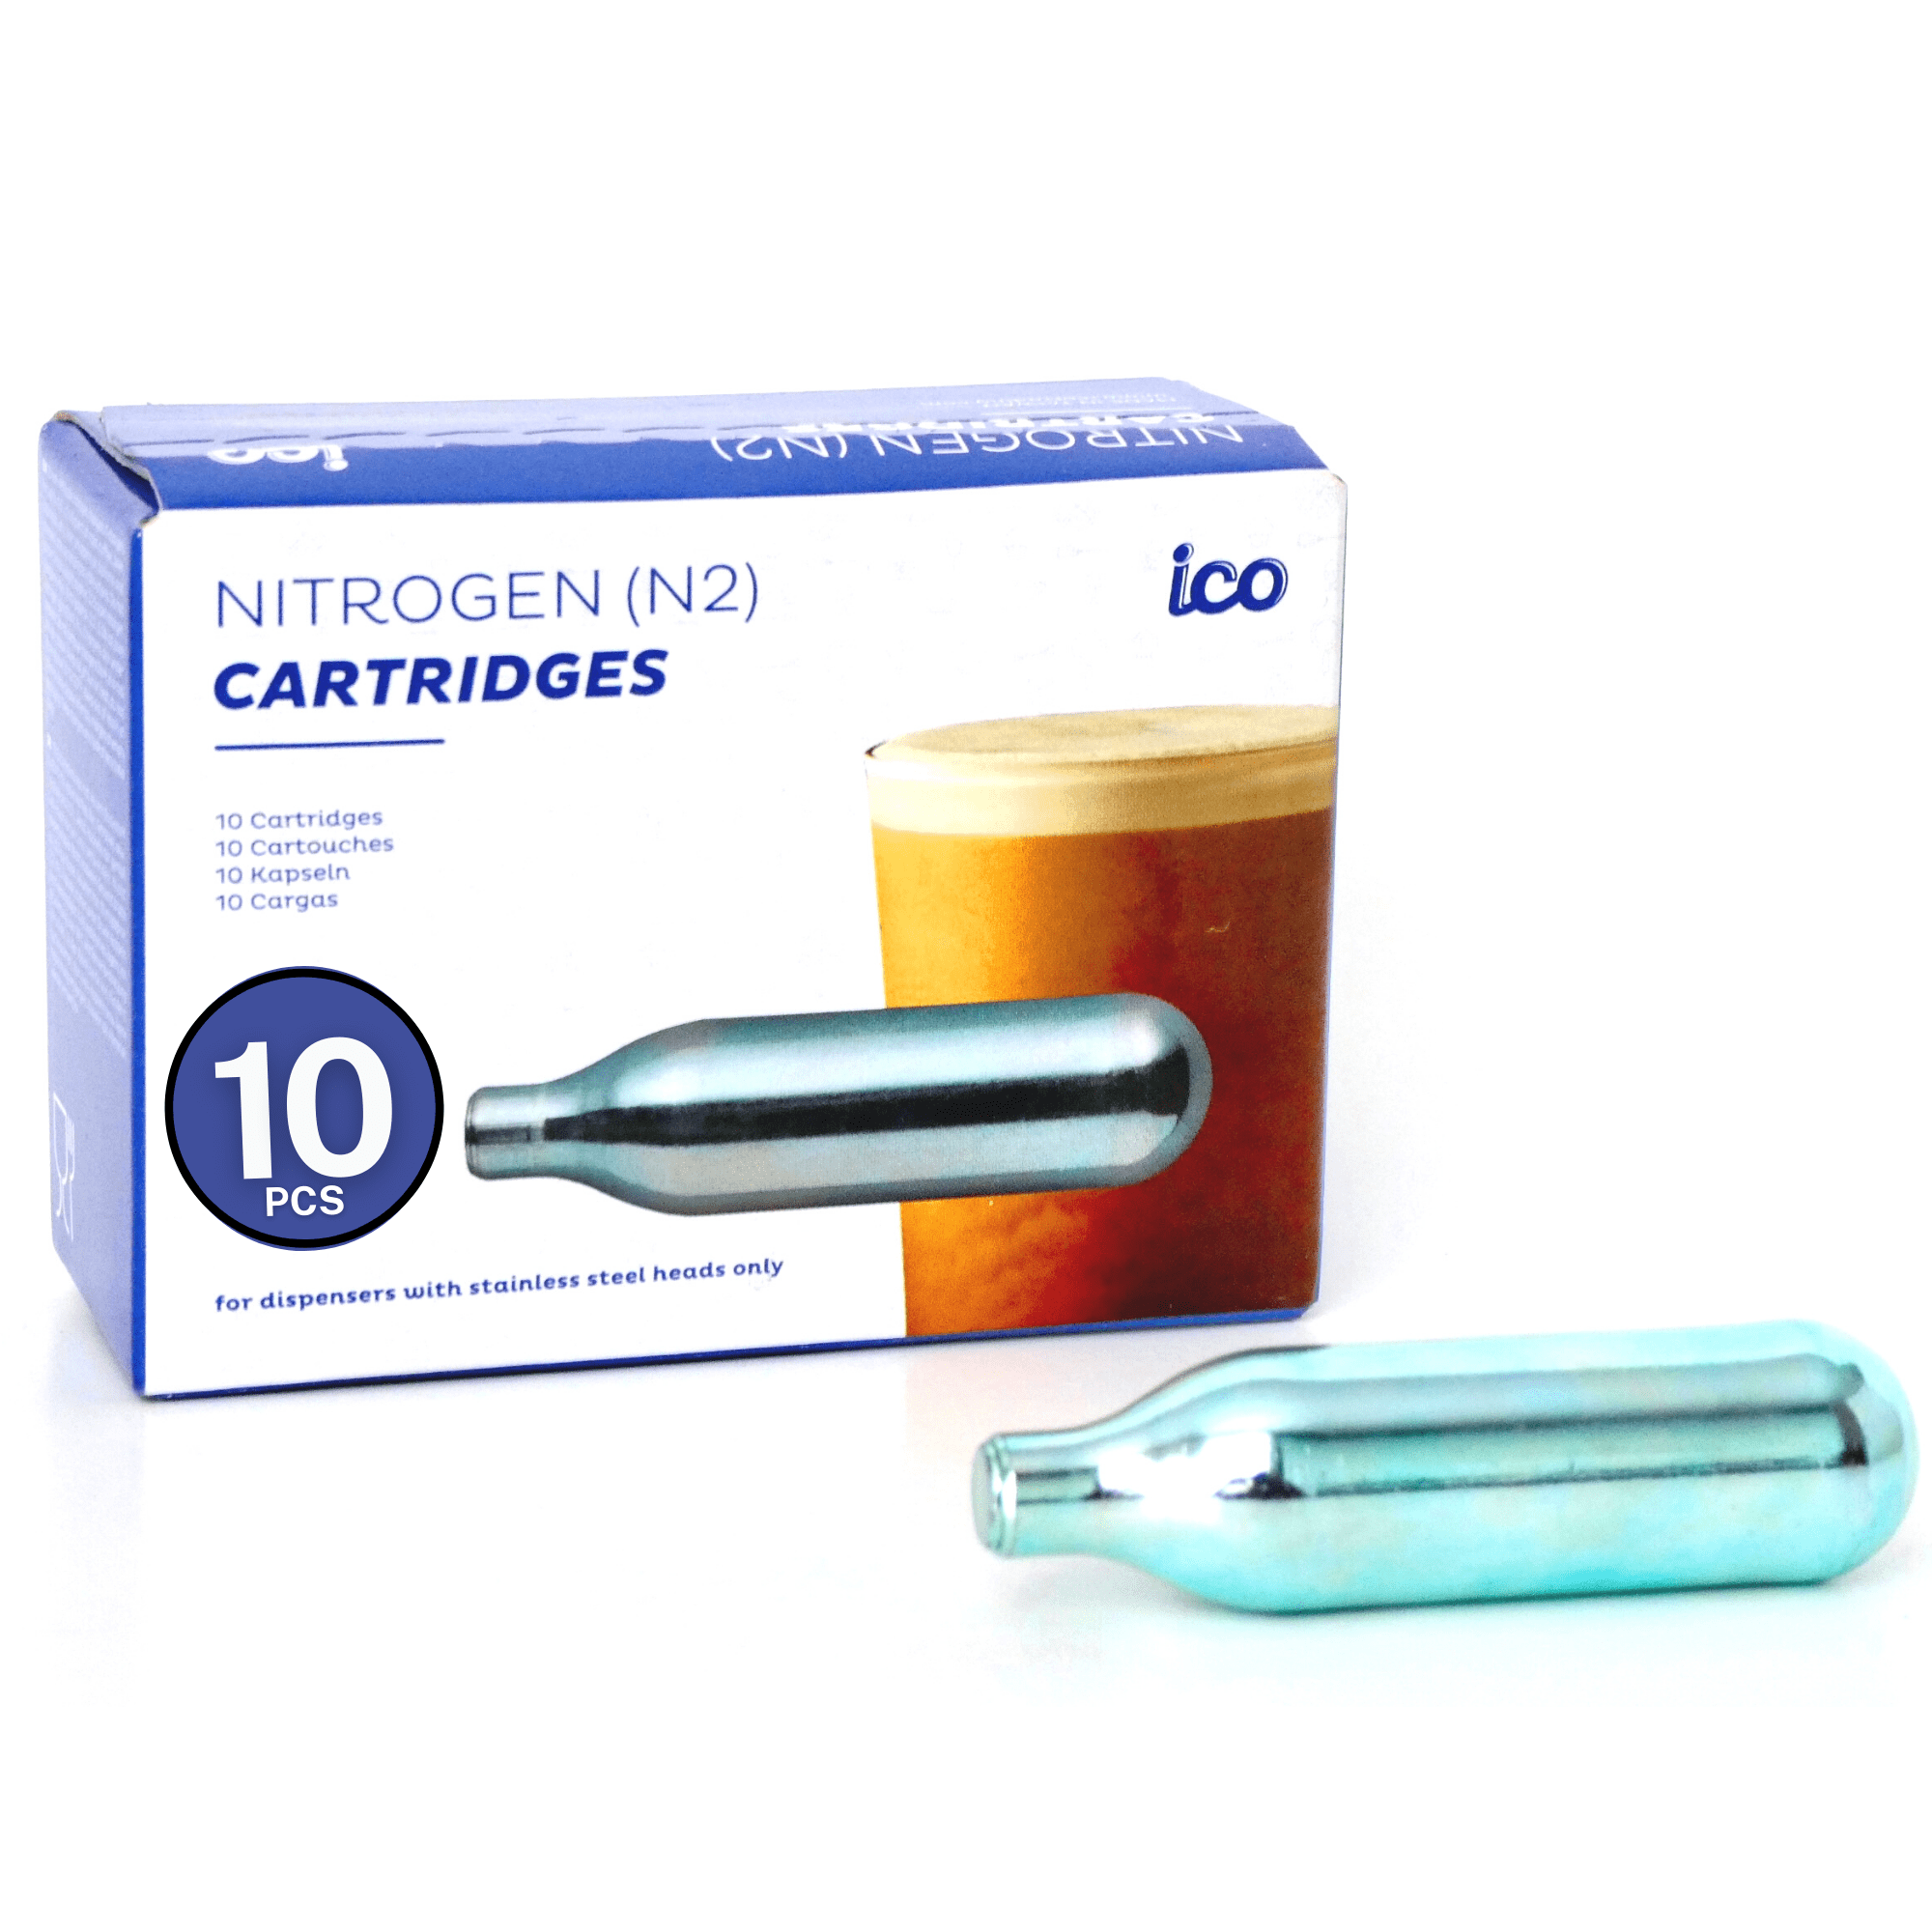  Royal Brew 10 Pack Nitrogen Chargers for Nitro Cold Brew Coffee  Makers - N2 Cartridges - Works With All Royal Brew Nitro Coffee Systems :  Home & Kitchen